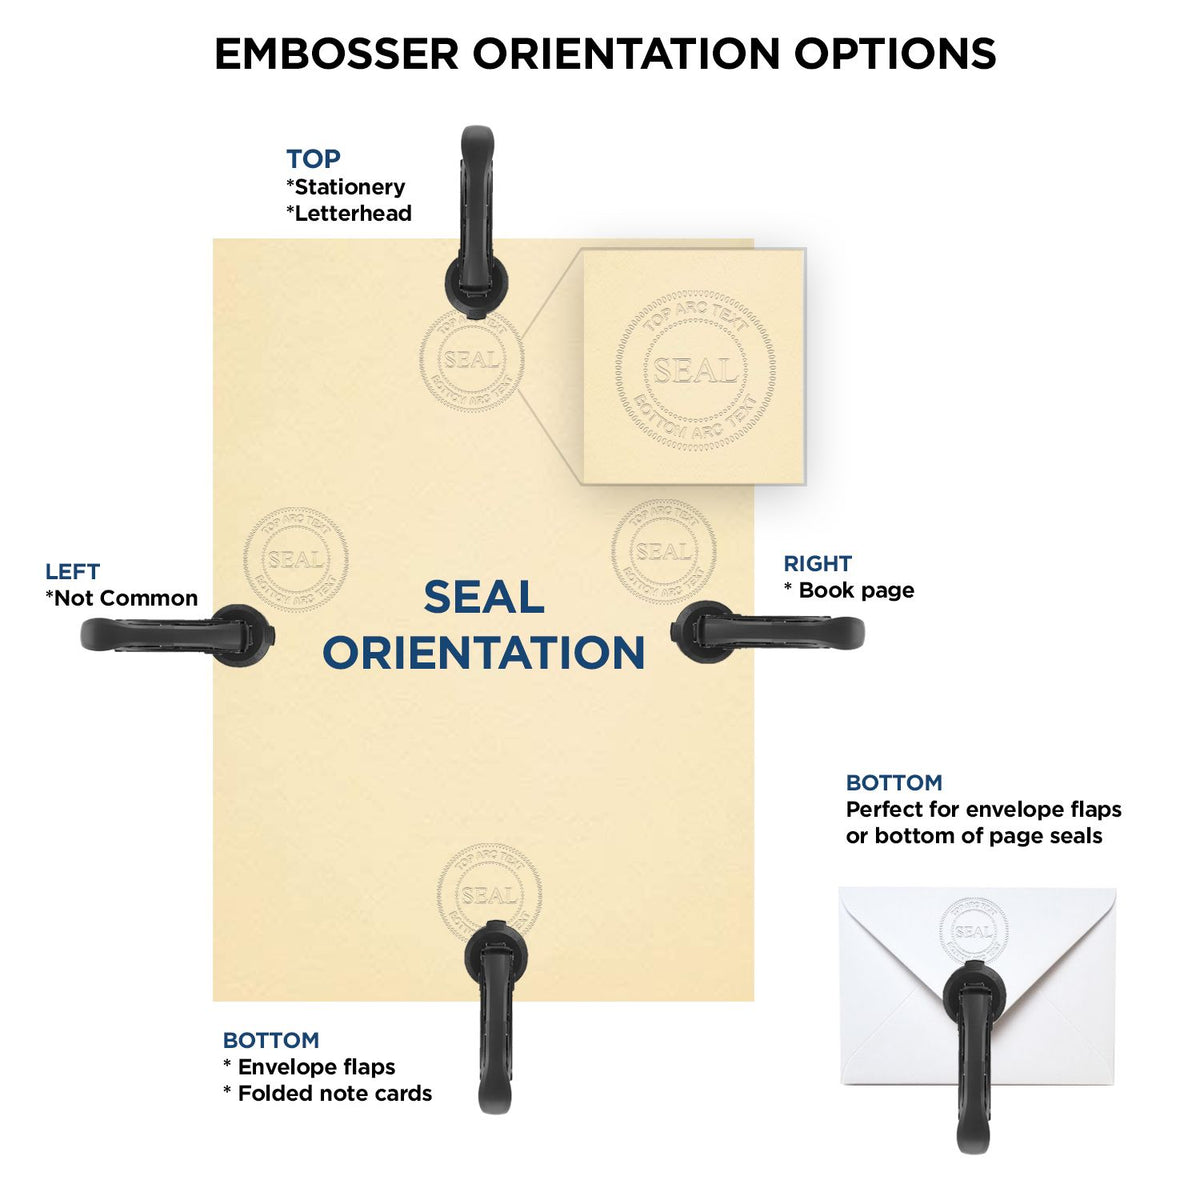 An infographic for the Gift Kansas Land Surveyor Seal showing embosser orientation, this is showing examples of a top, bottom, right and left insert.